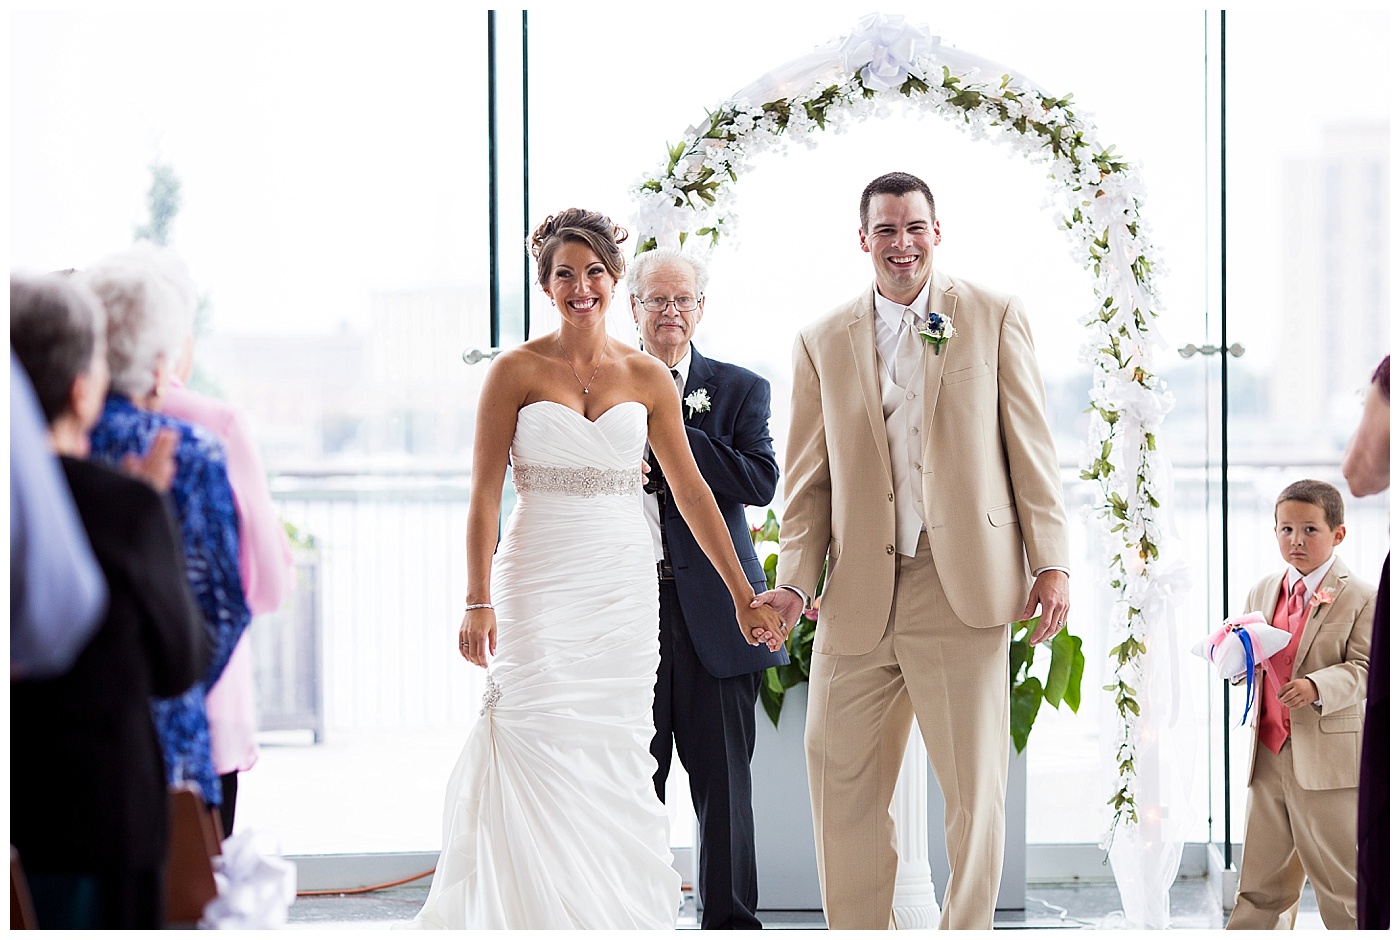 Tracey and Richard are Married!!  A Half Moone Cruise and Celebration Center wedding in Norfolk